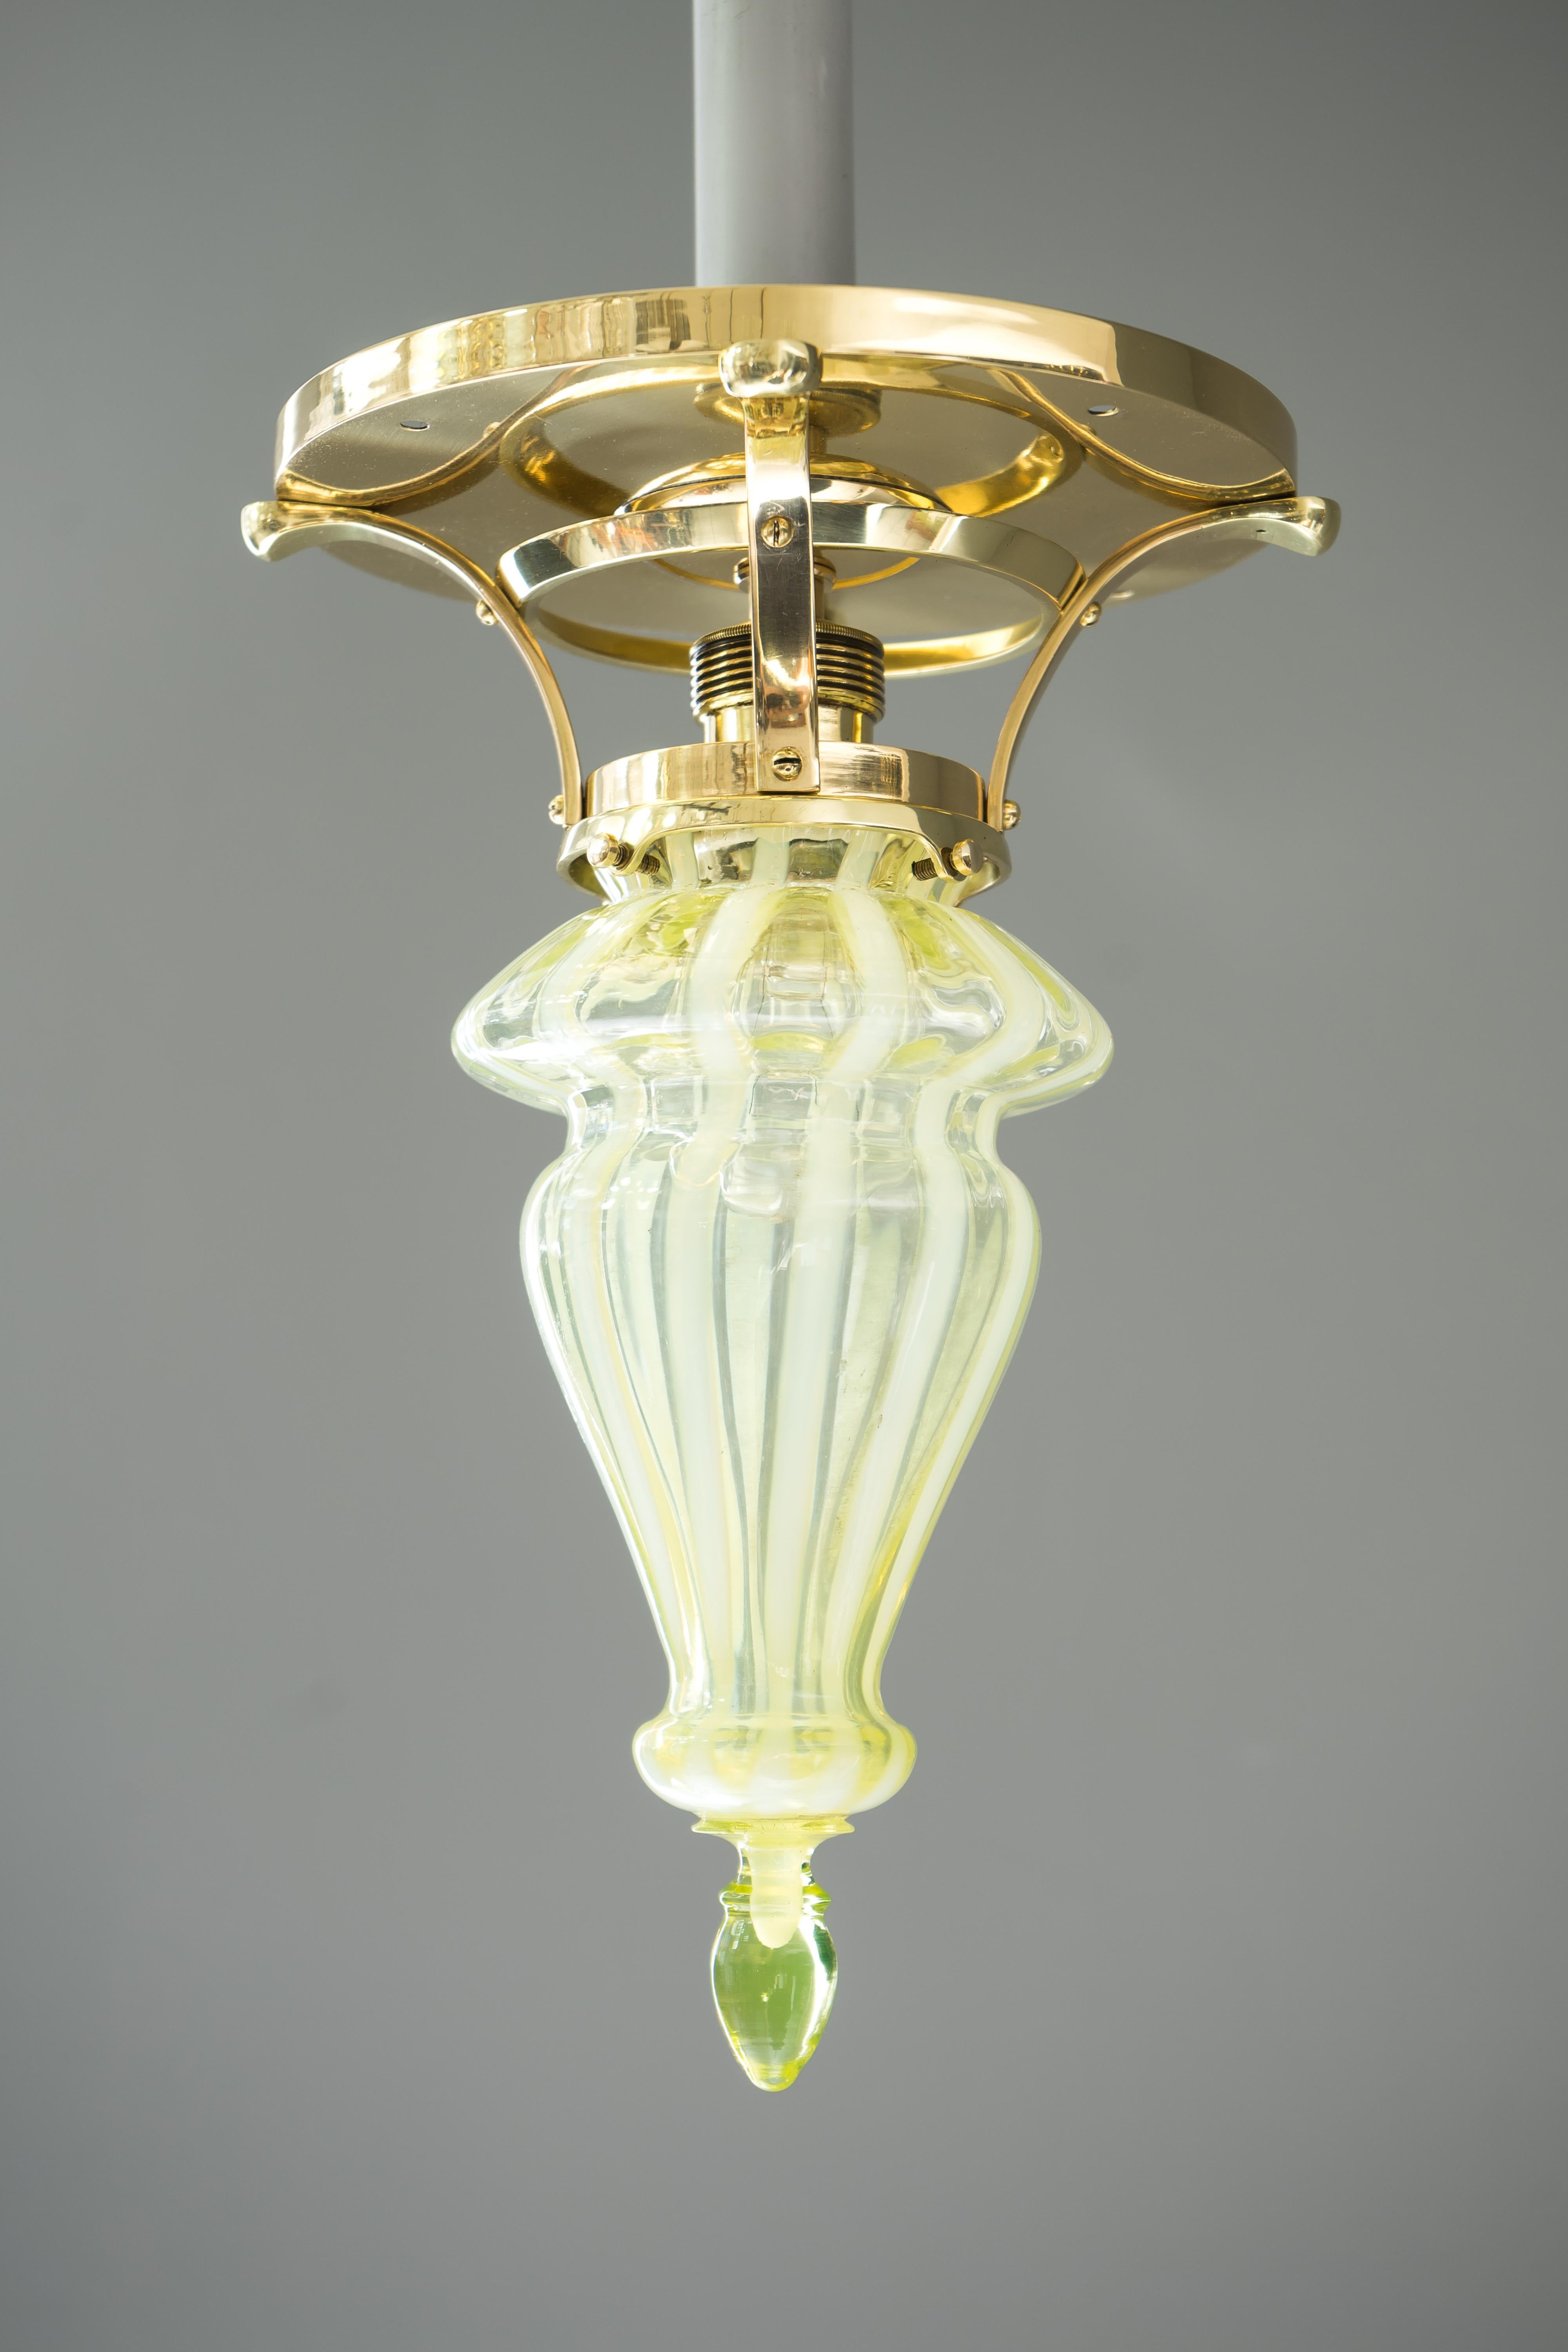 Art Deco ceiling lamp with Opaline glass shade, circa 1918.
Polished and stove enameled.